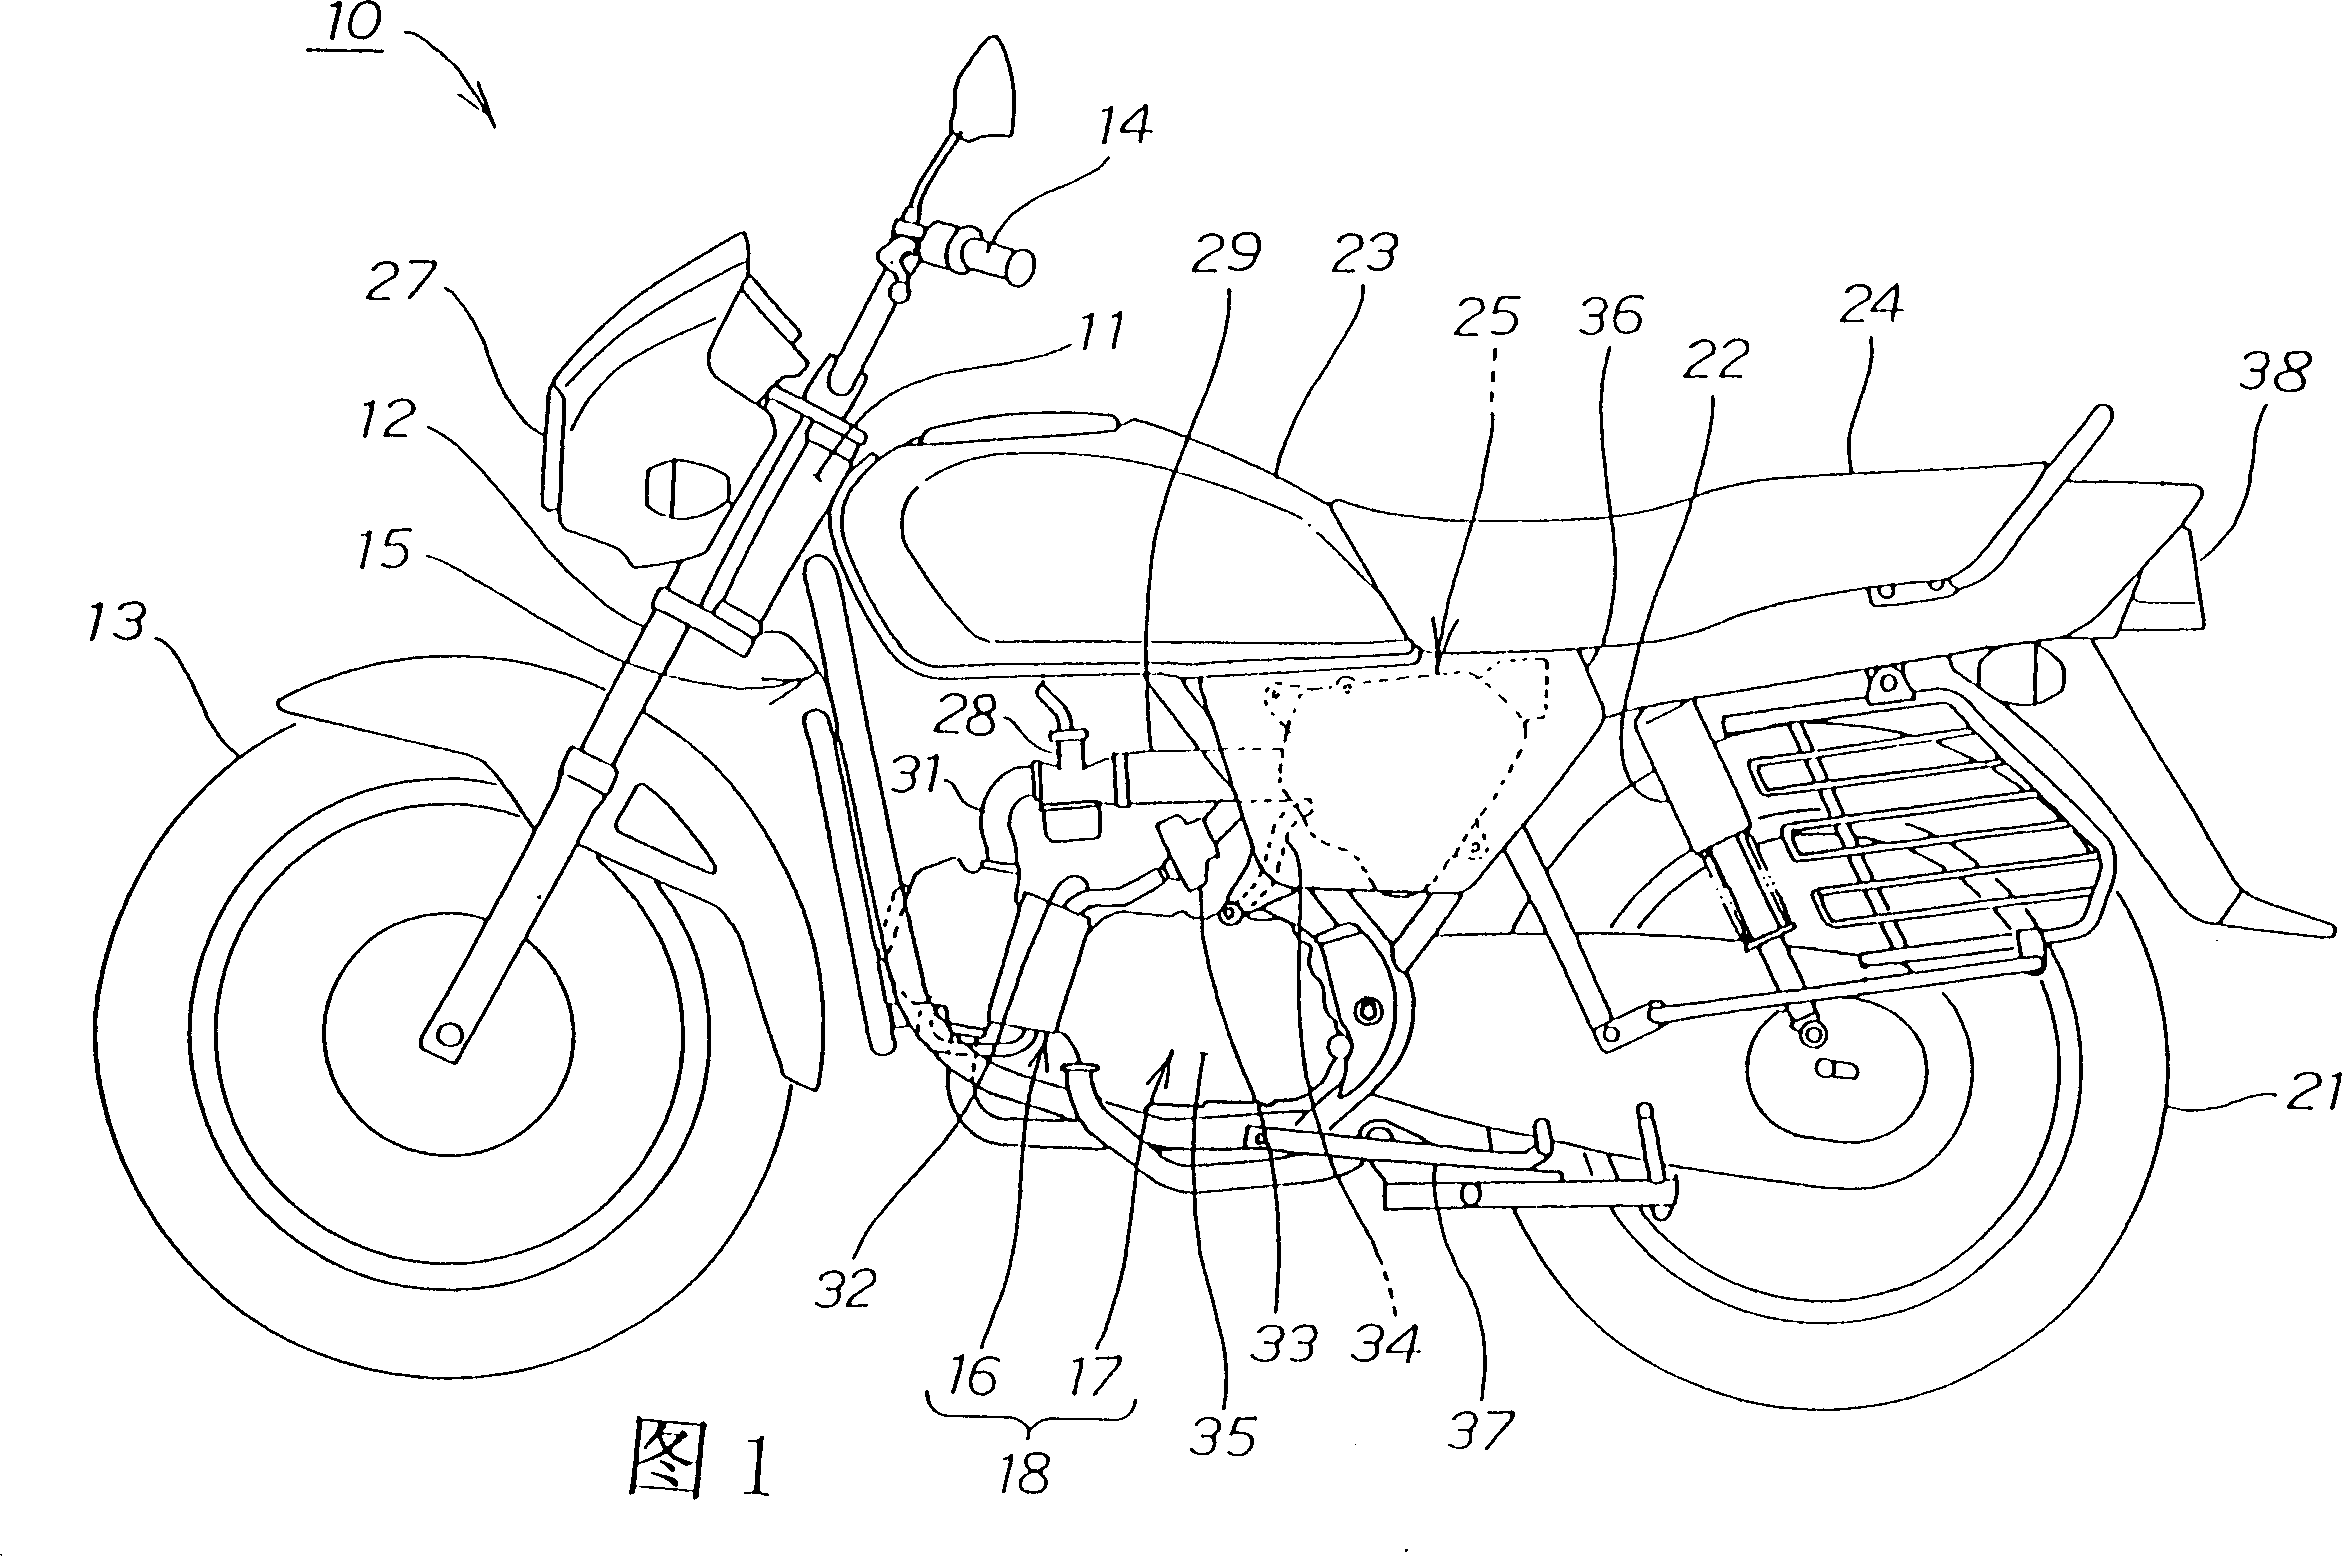 Air filter for motor driving bicycle